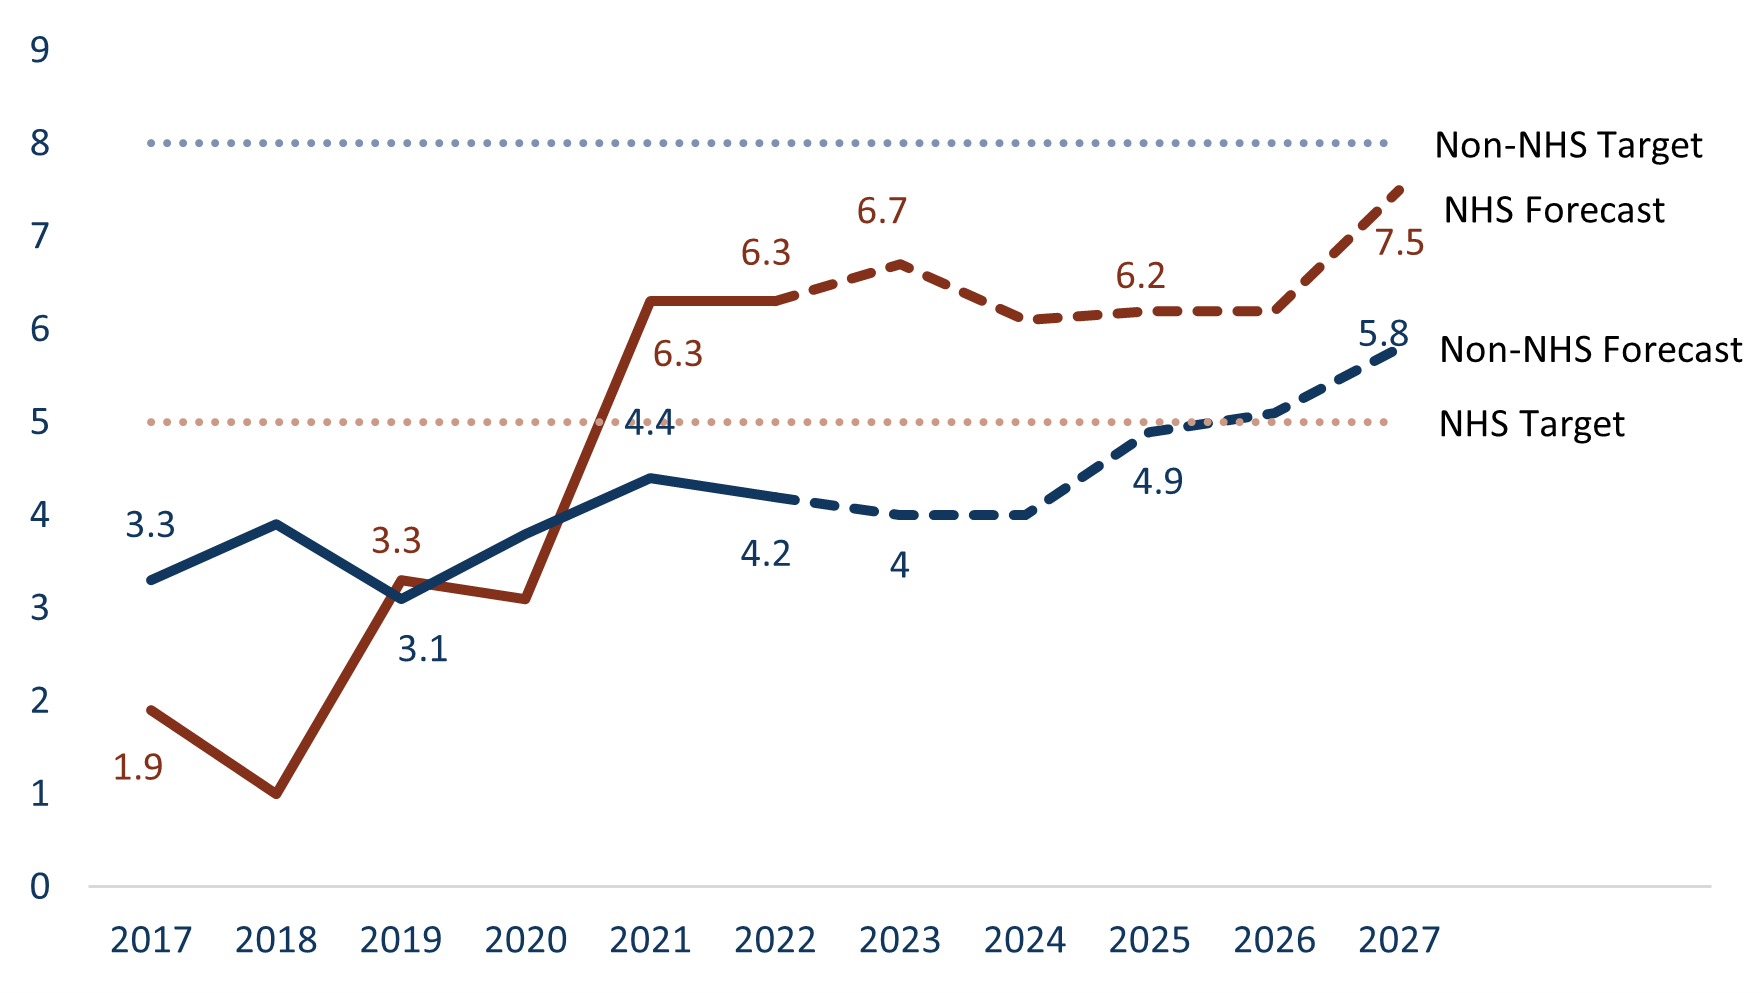 Graph showing the current and forecast state highway bridges in poor condition for Non NHS target, Non-NHS forecast, and NHS target, and NHS forecast from 2017-2027.